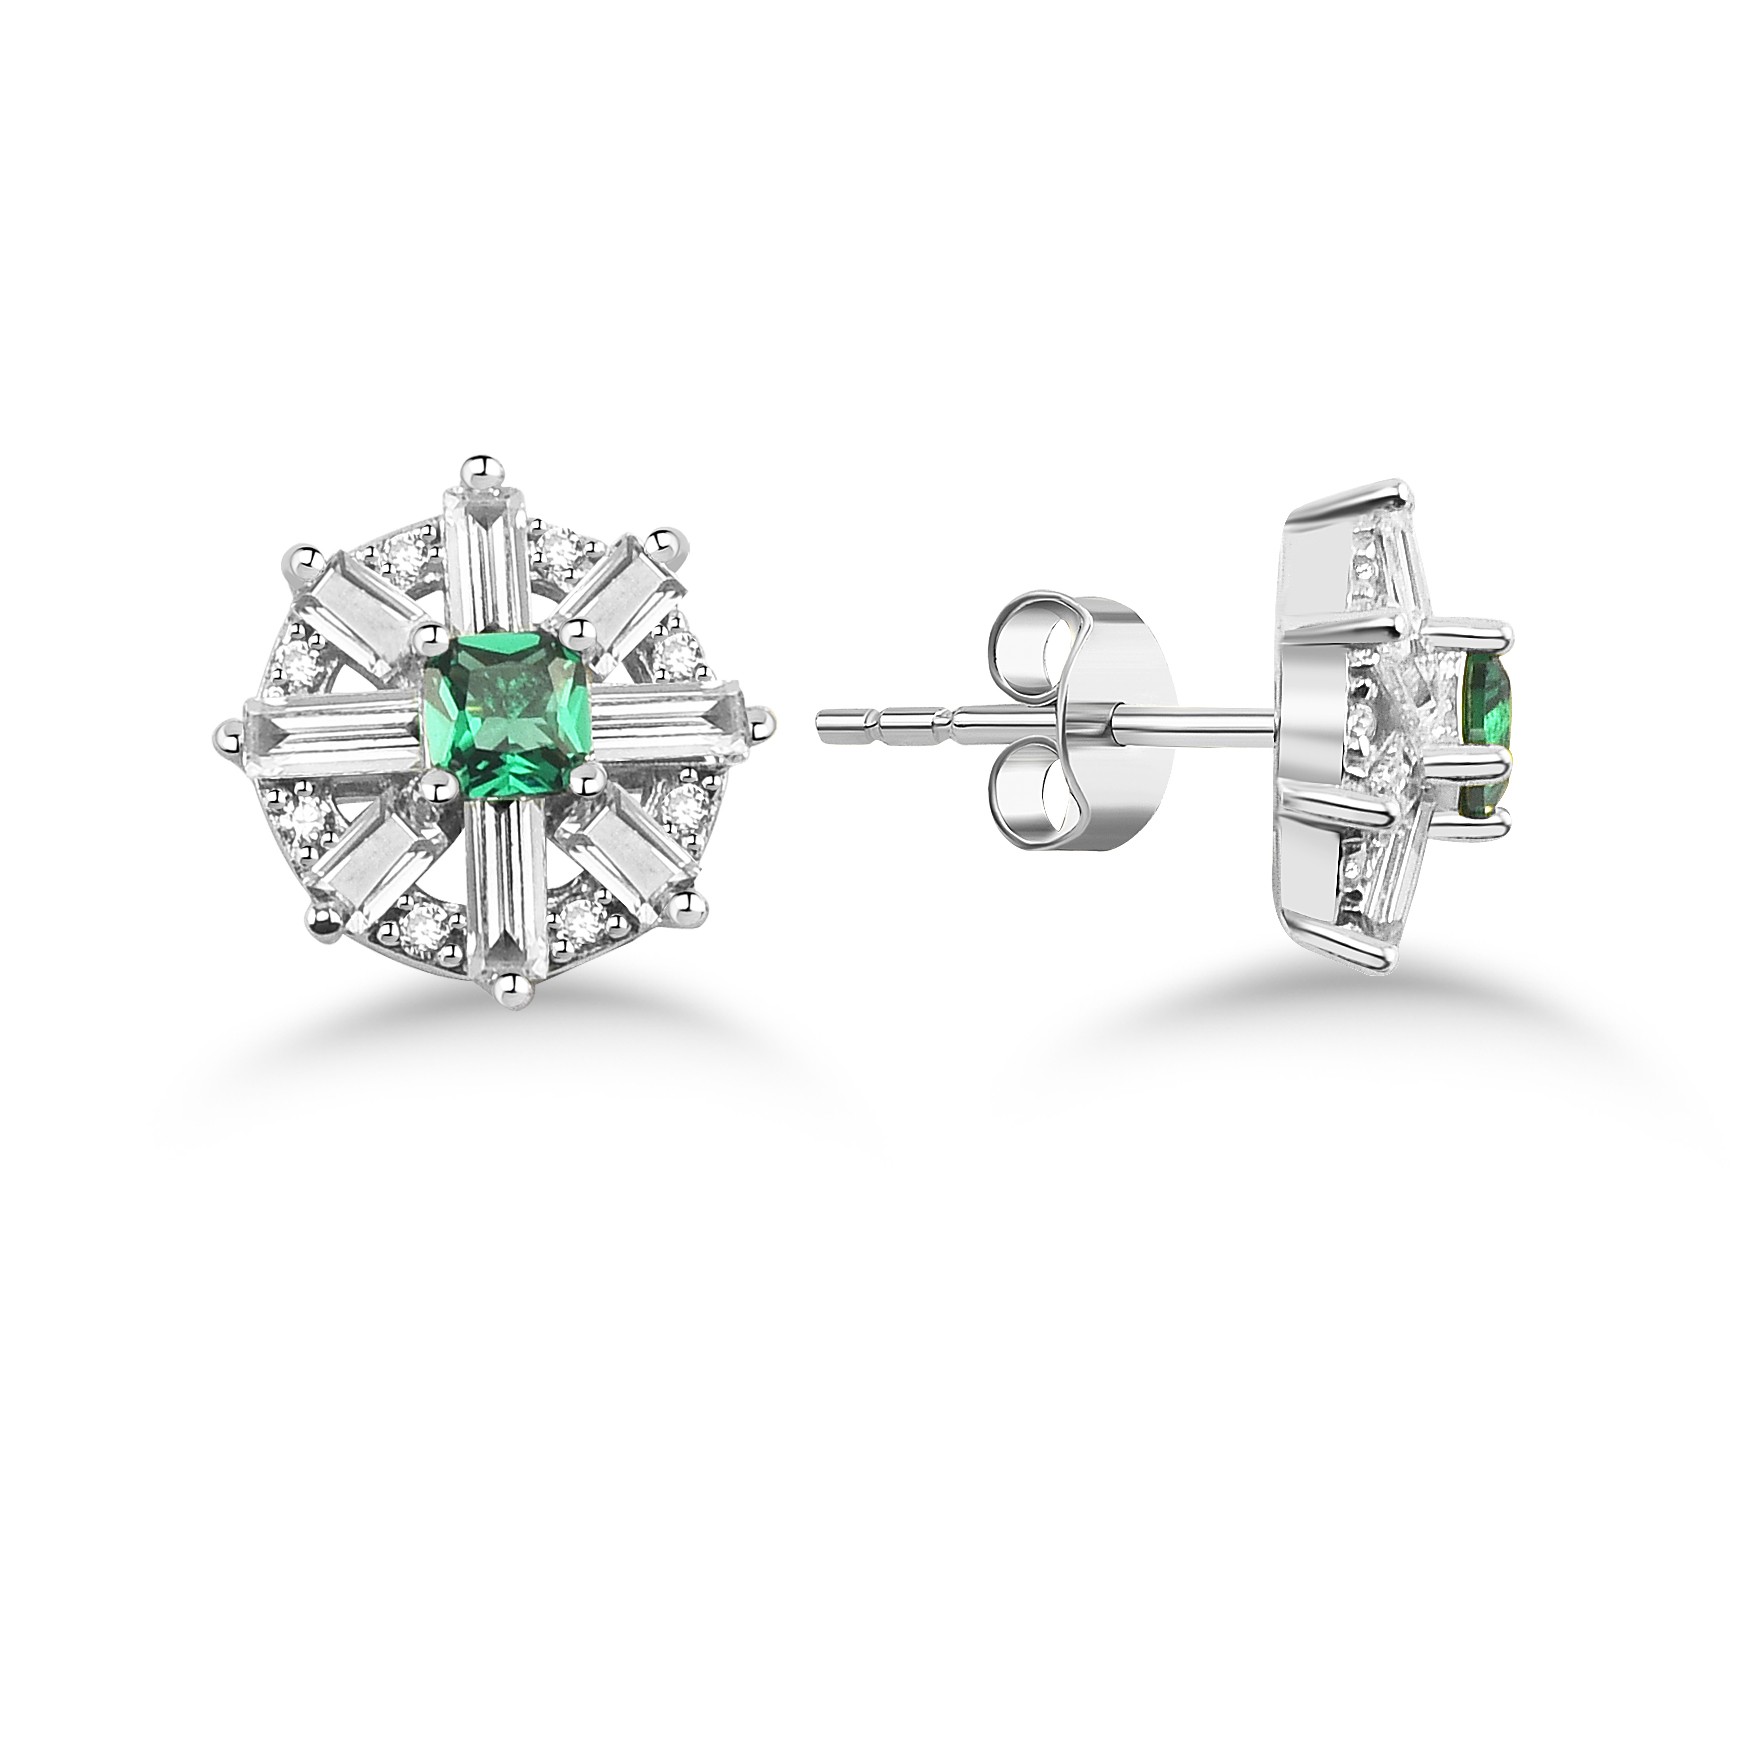 Emerald and Baguette Earrings - Silver